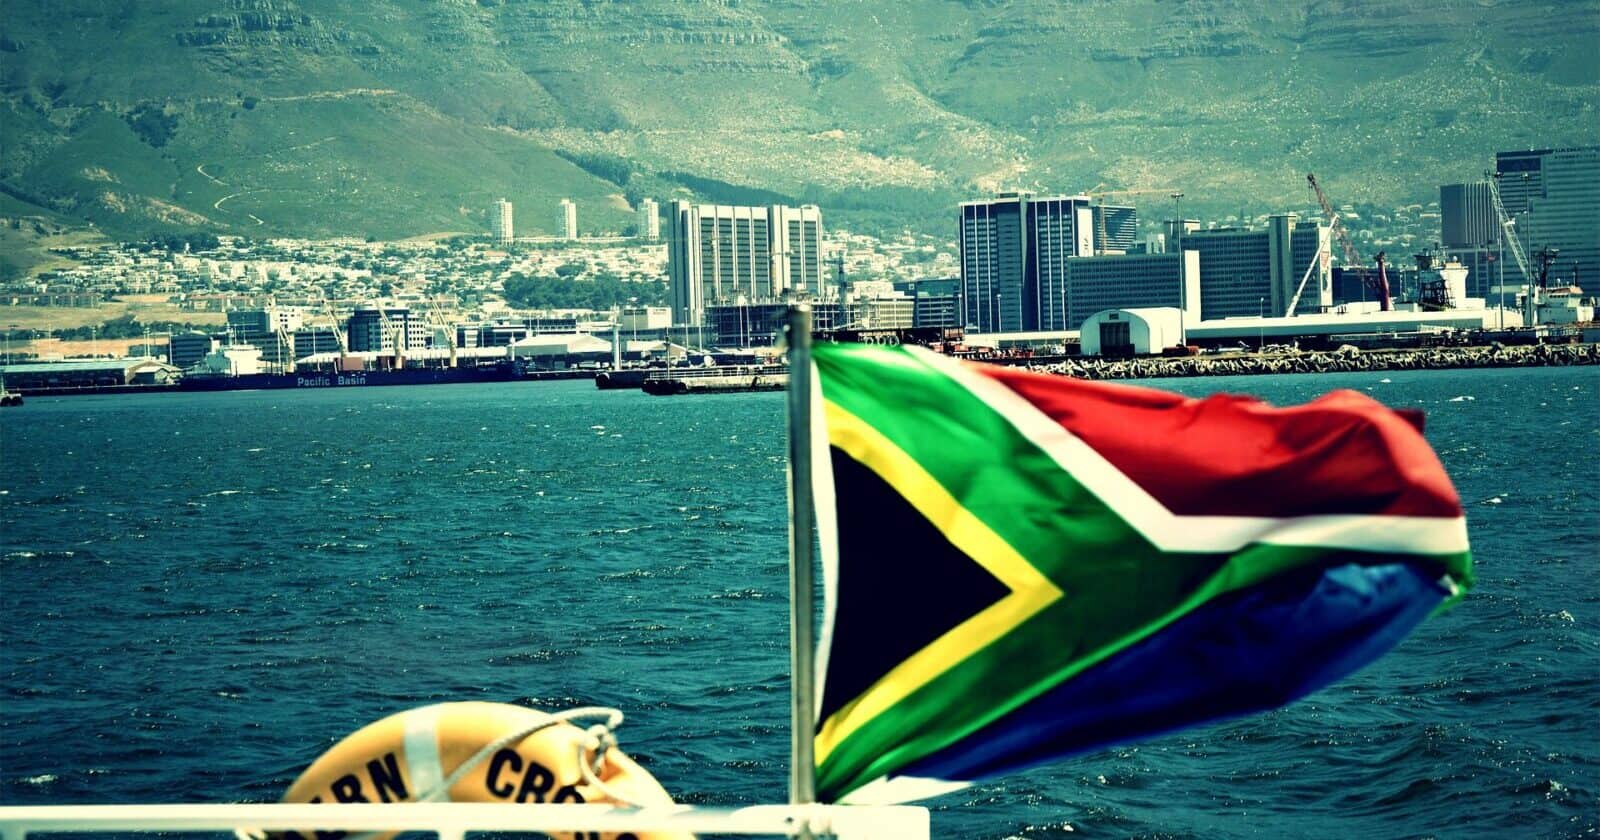 Just In- South Africa Regulator Plans To Make Crypto Licensing Mandatory By End Of 2023